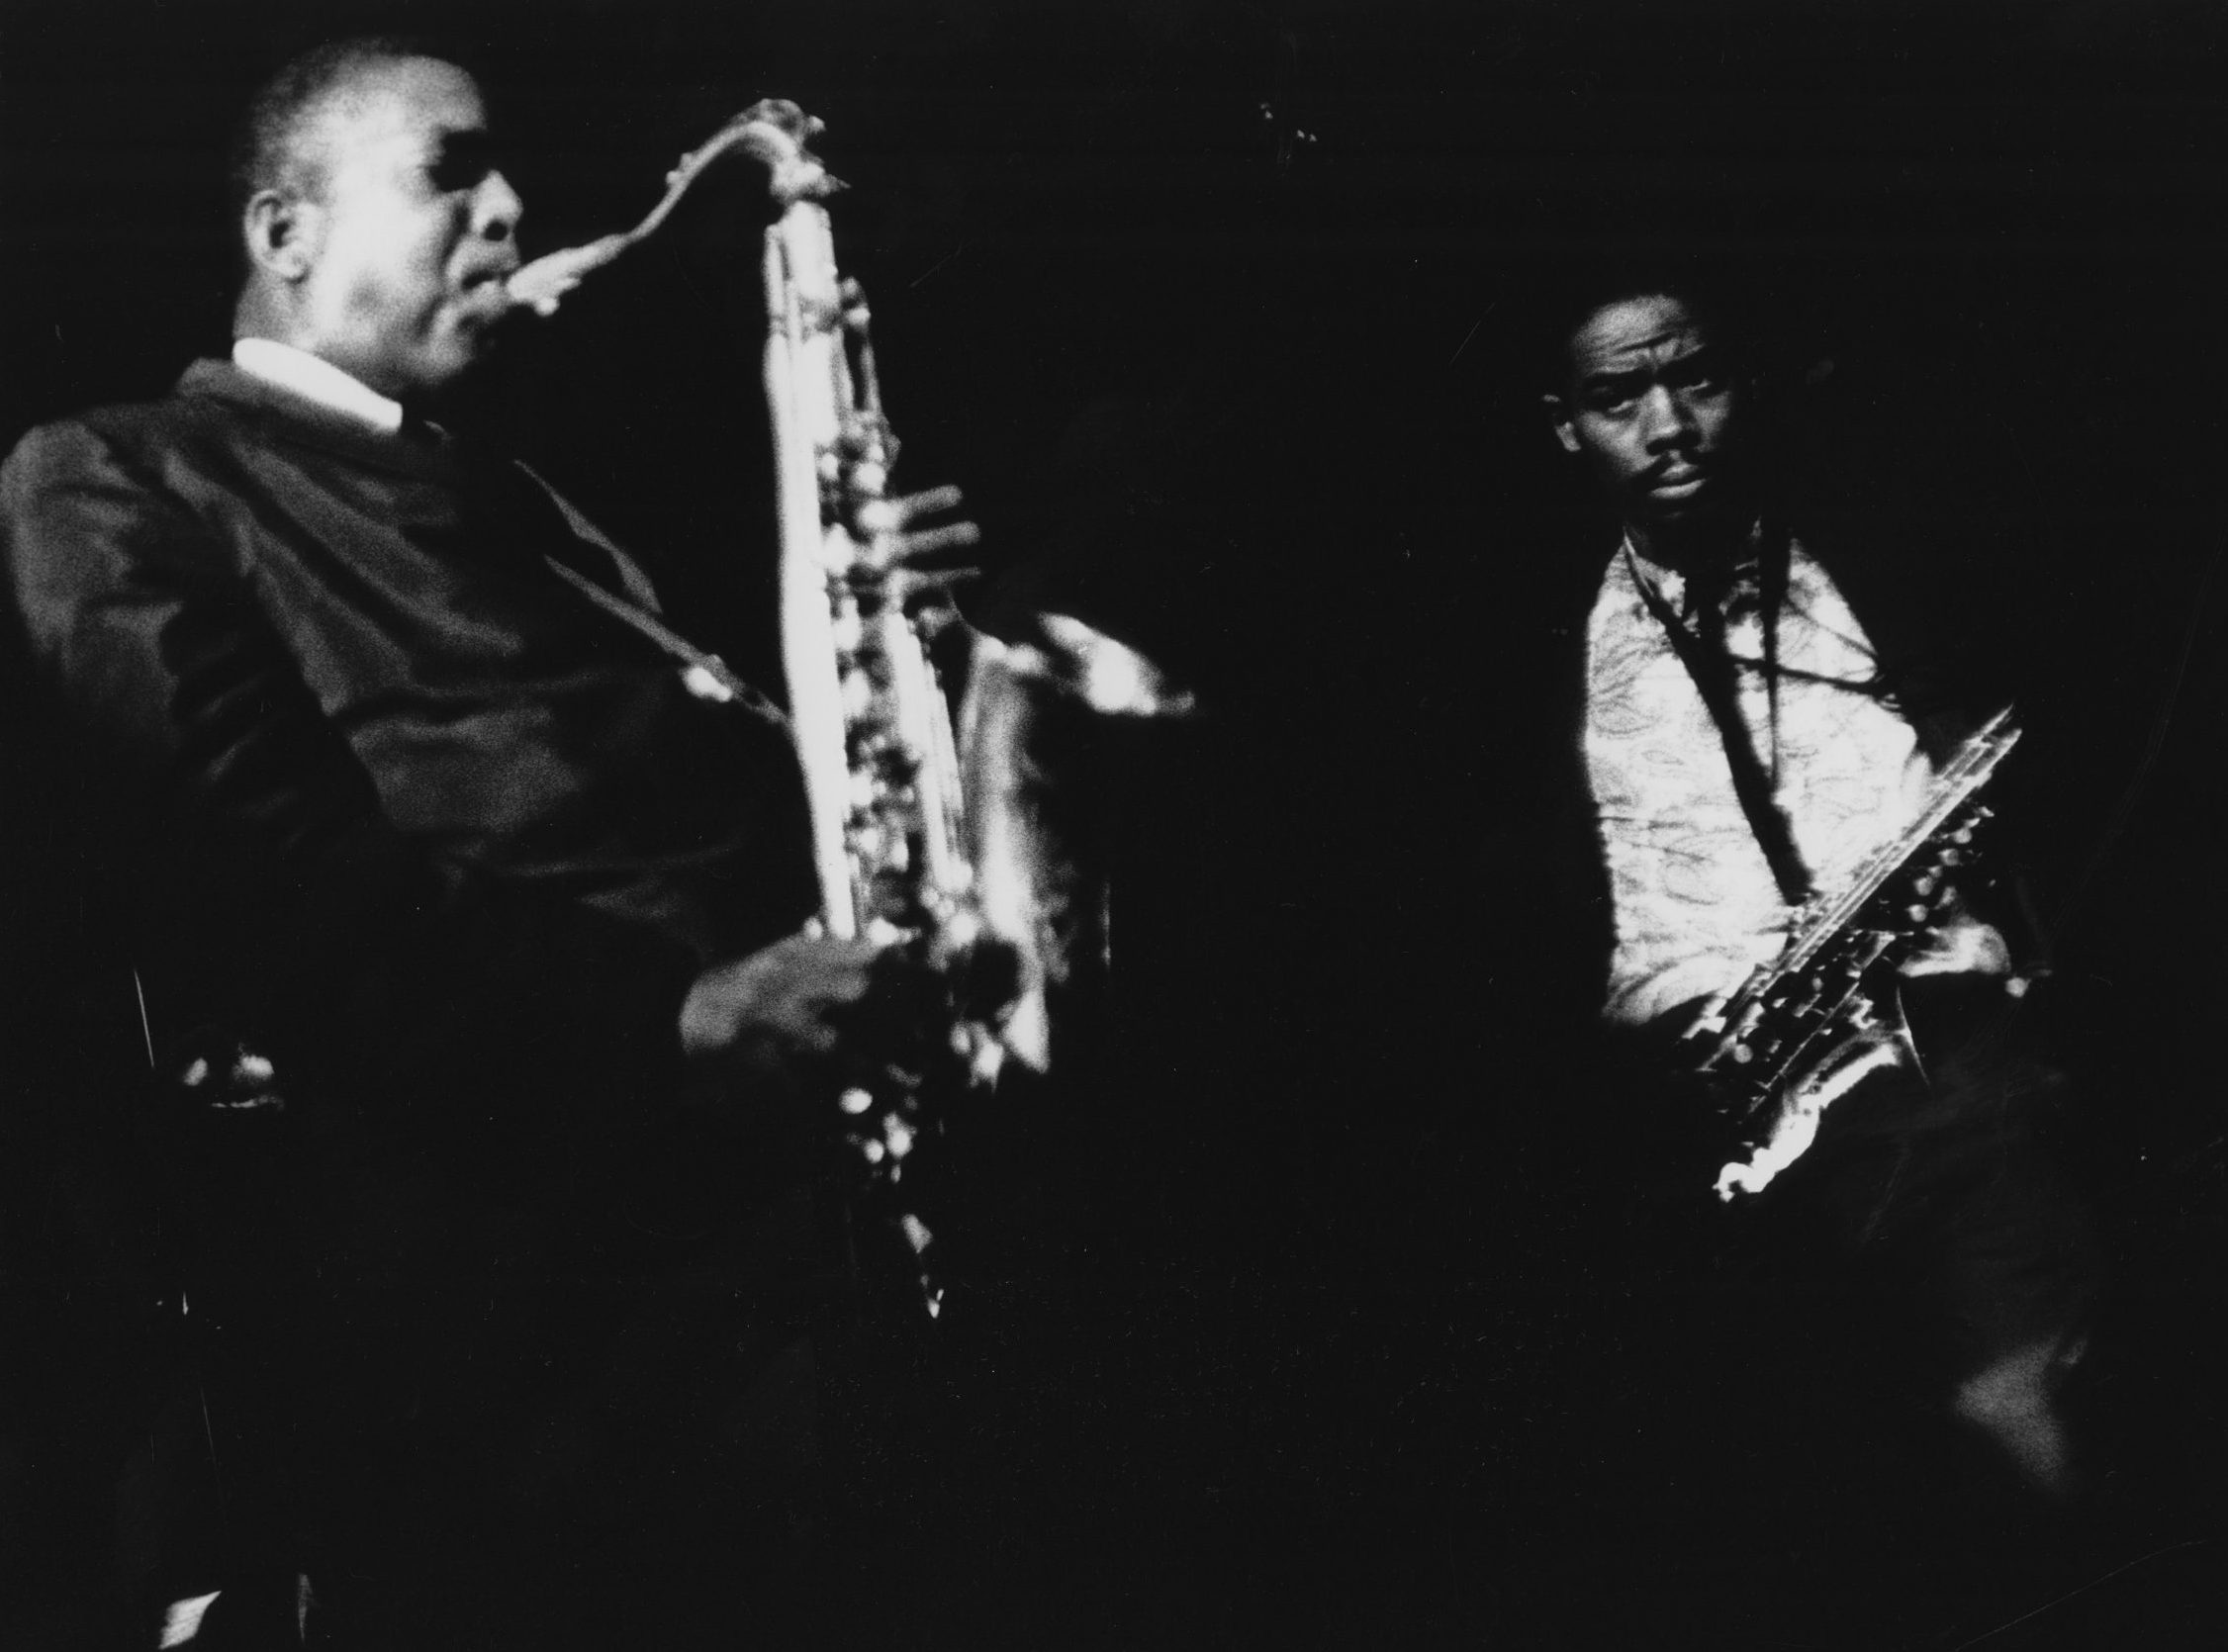 Previously unheard performance by John Coltrane and Eric Dolphy set for vinyl